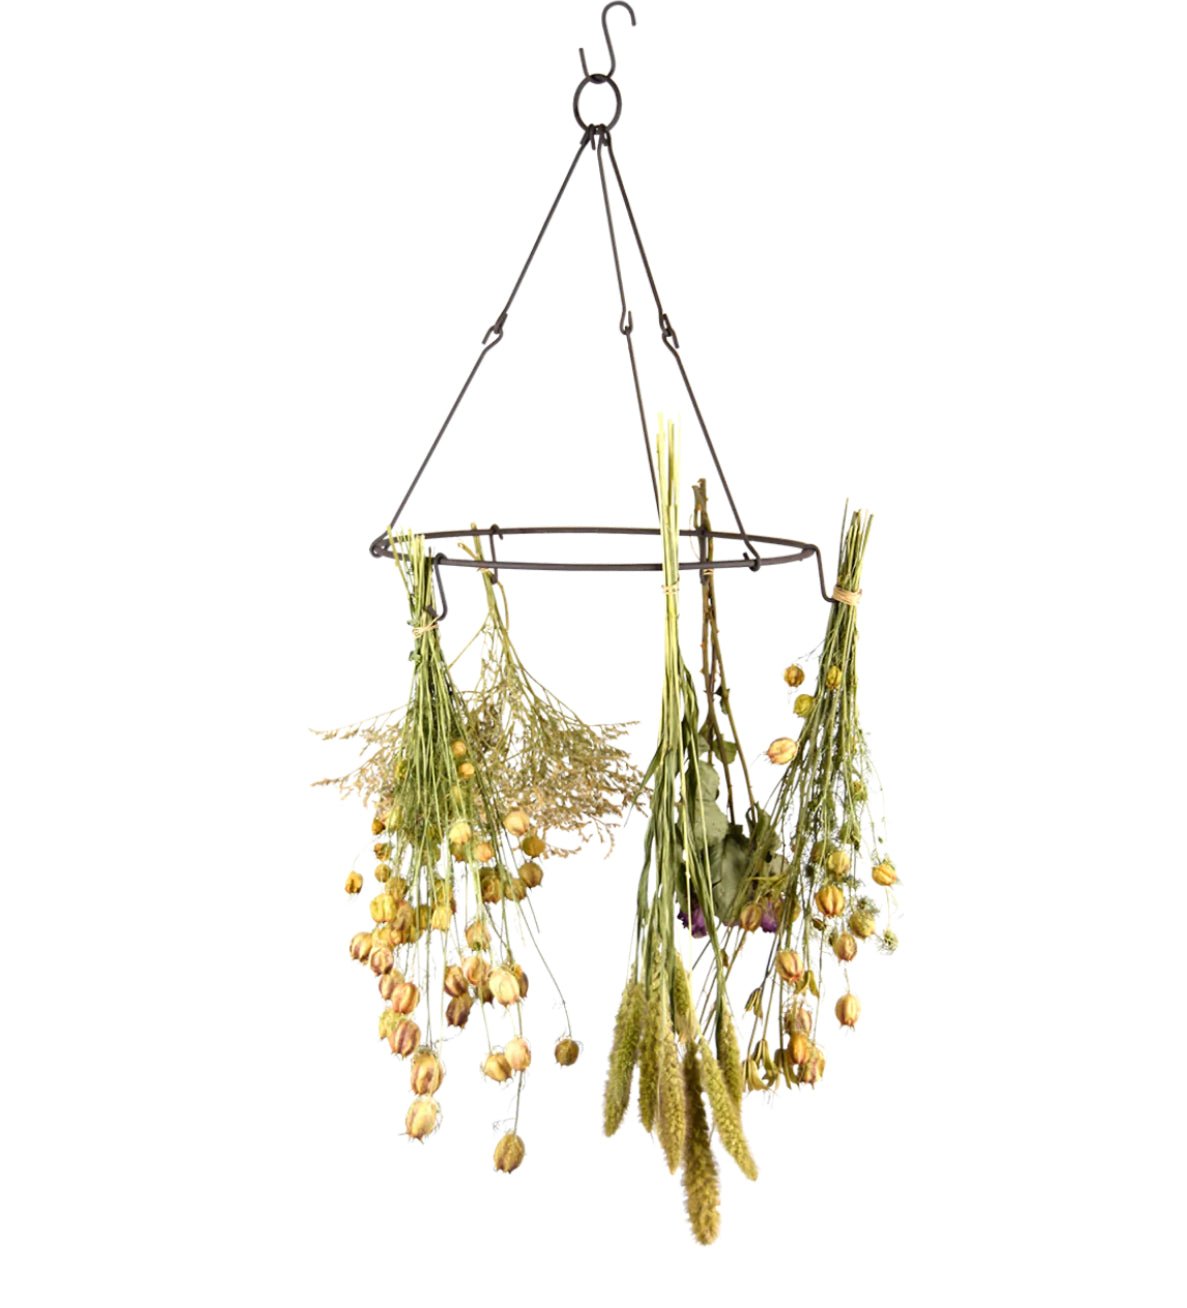 Dried Flowers and Herb Dryer - The Flower Crate